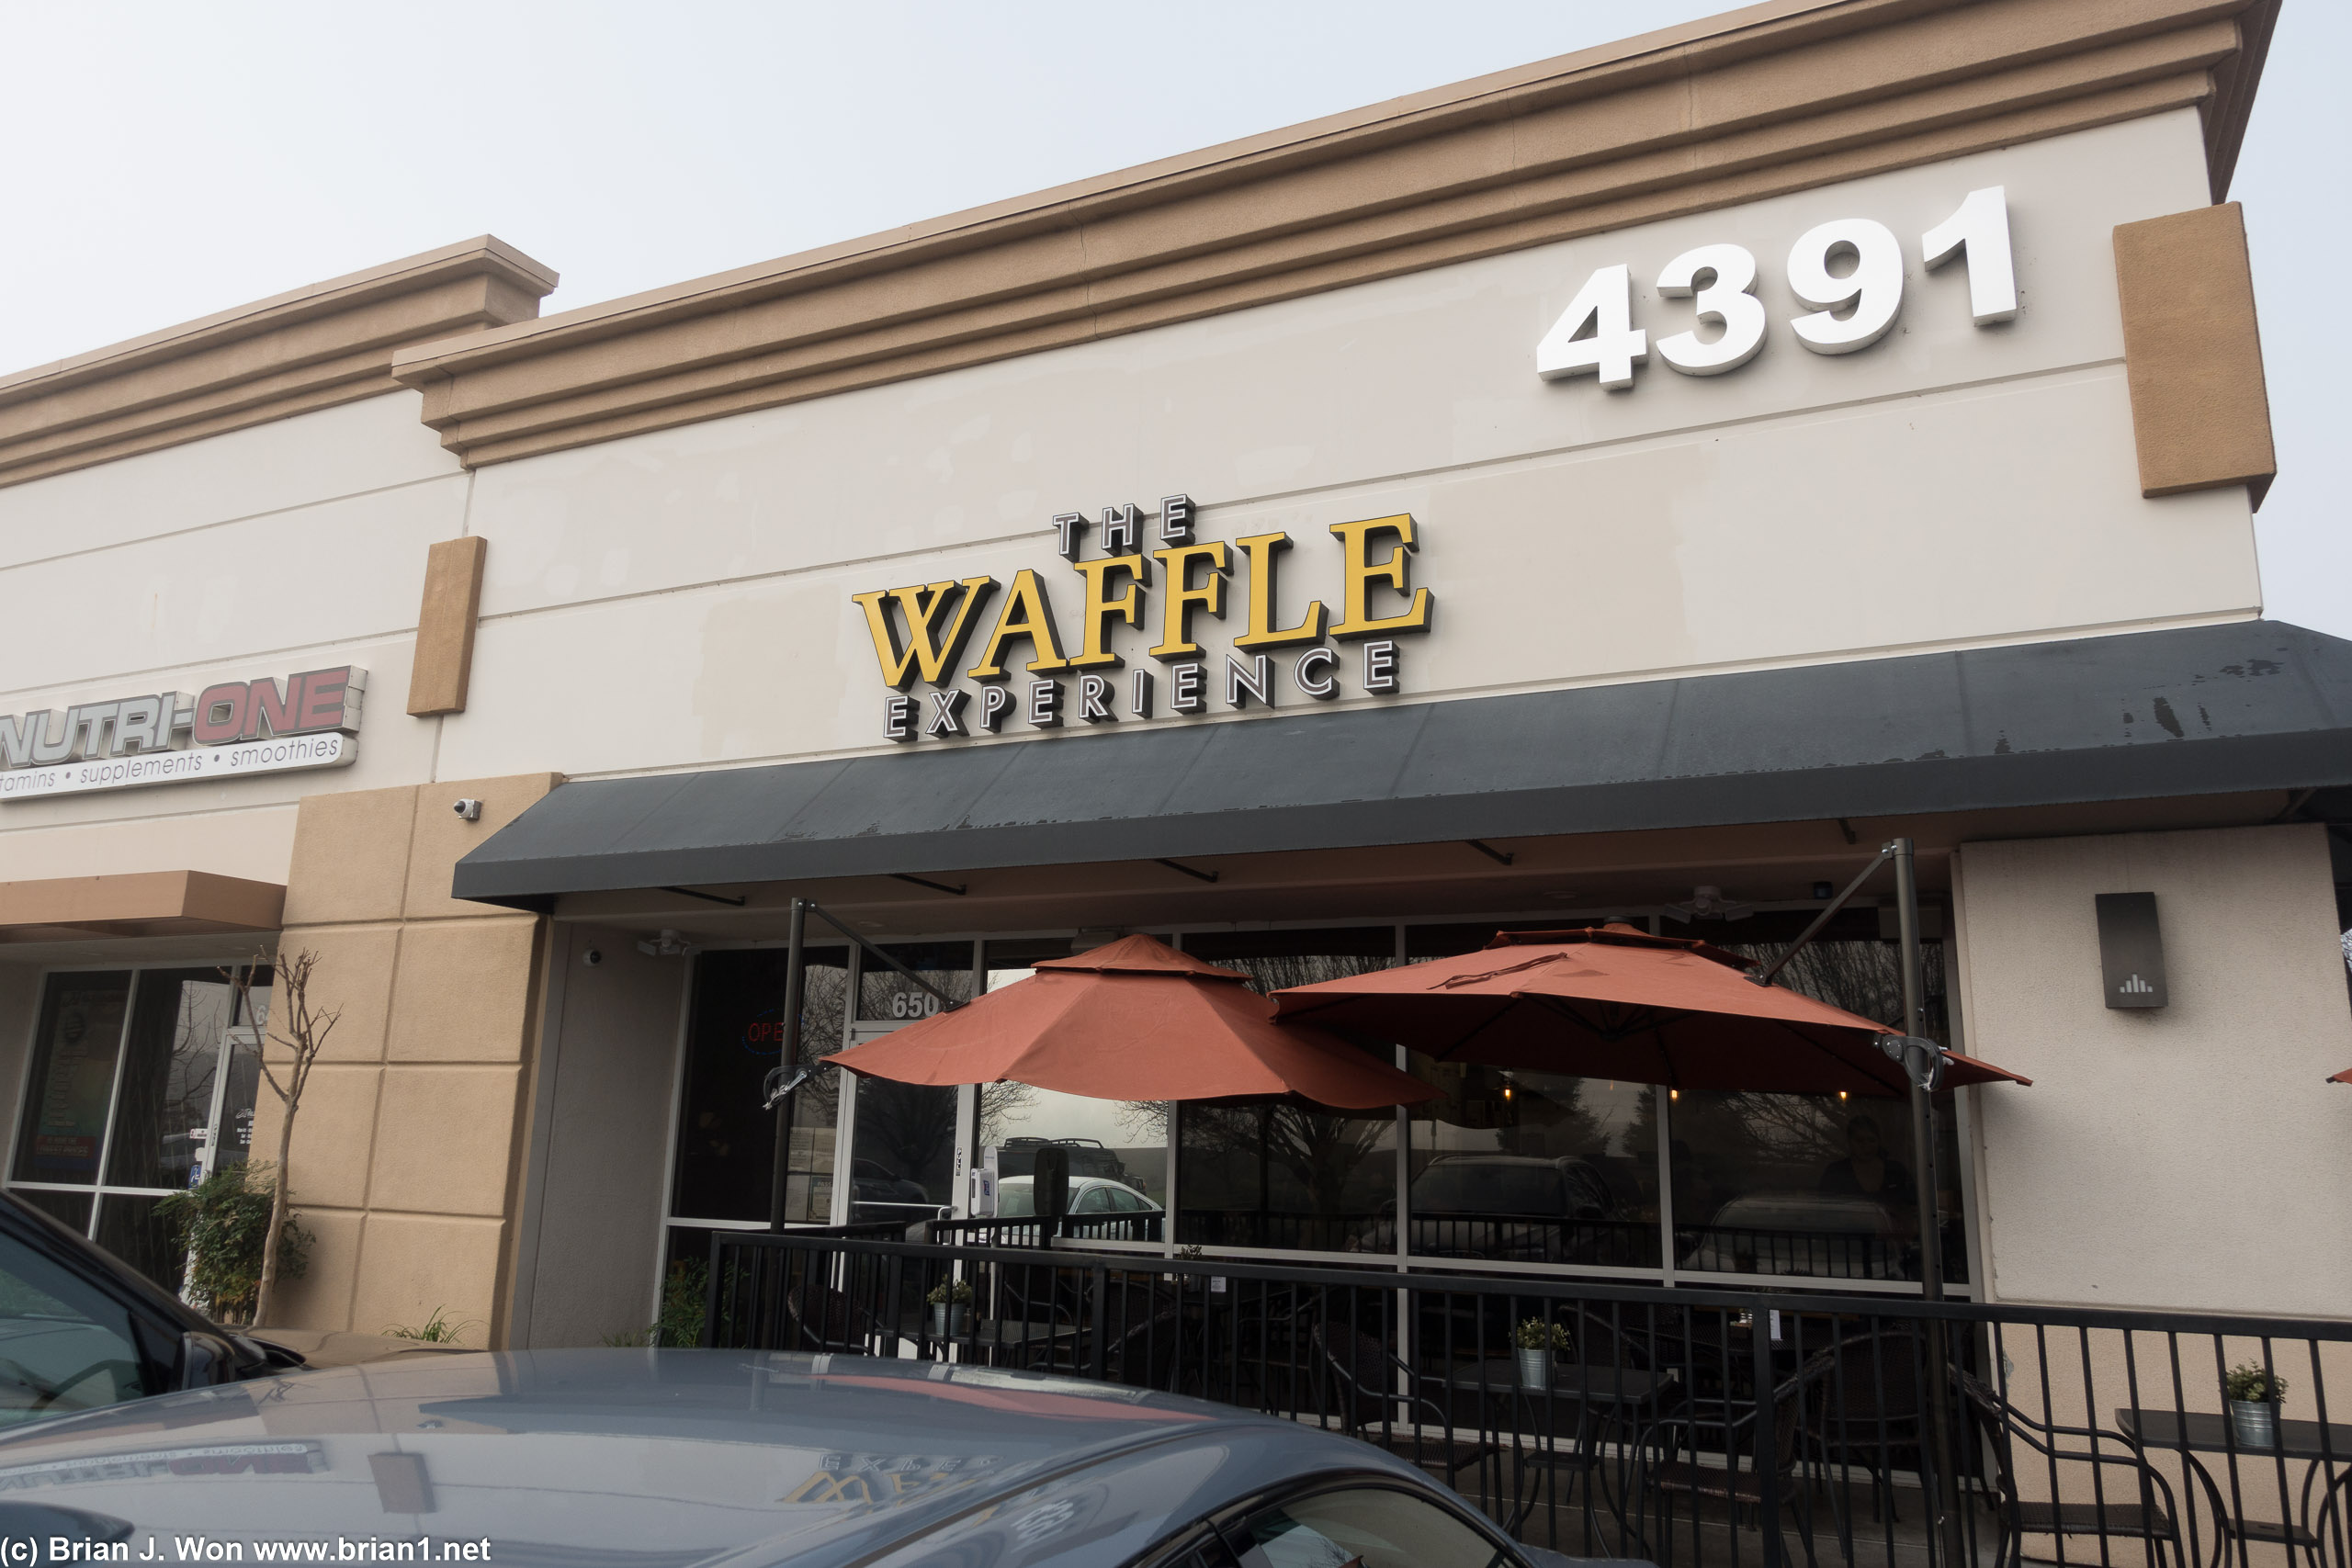 The Waffle Experience.